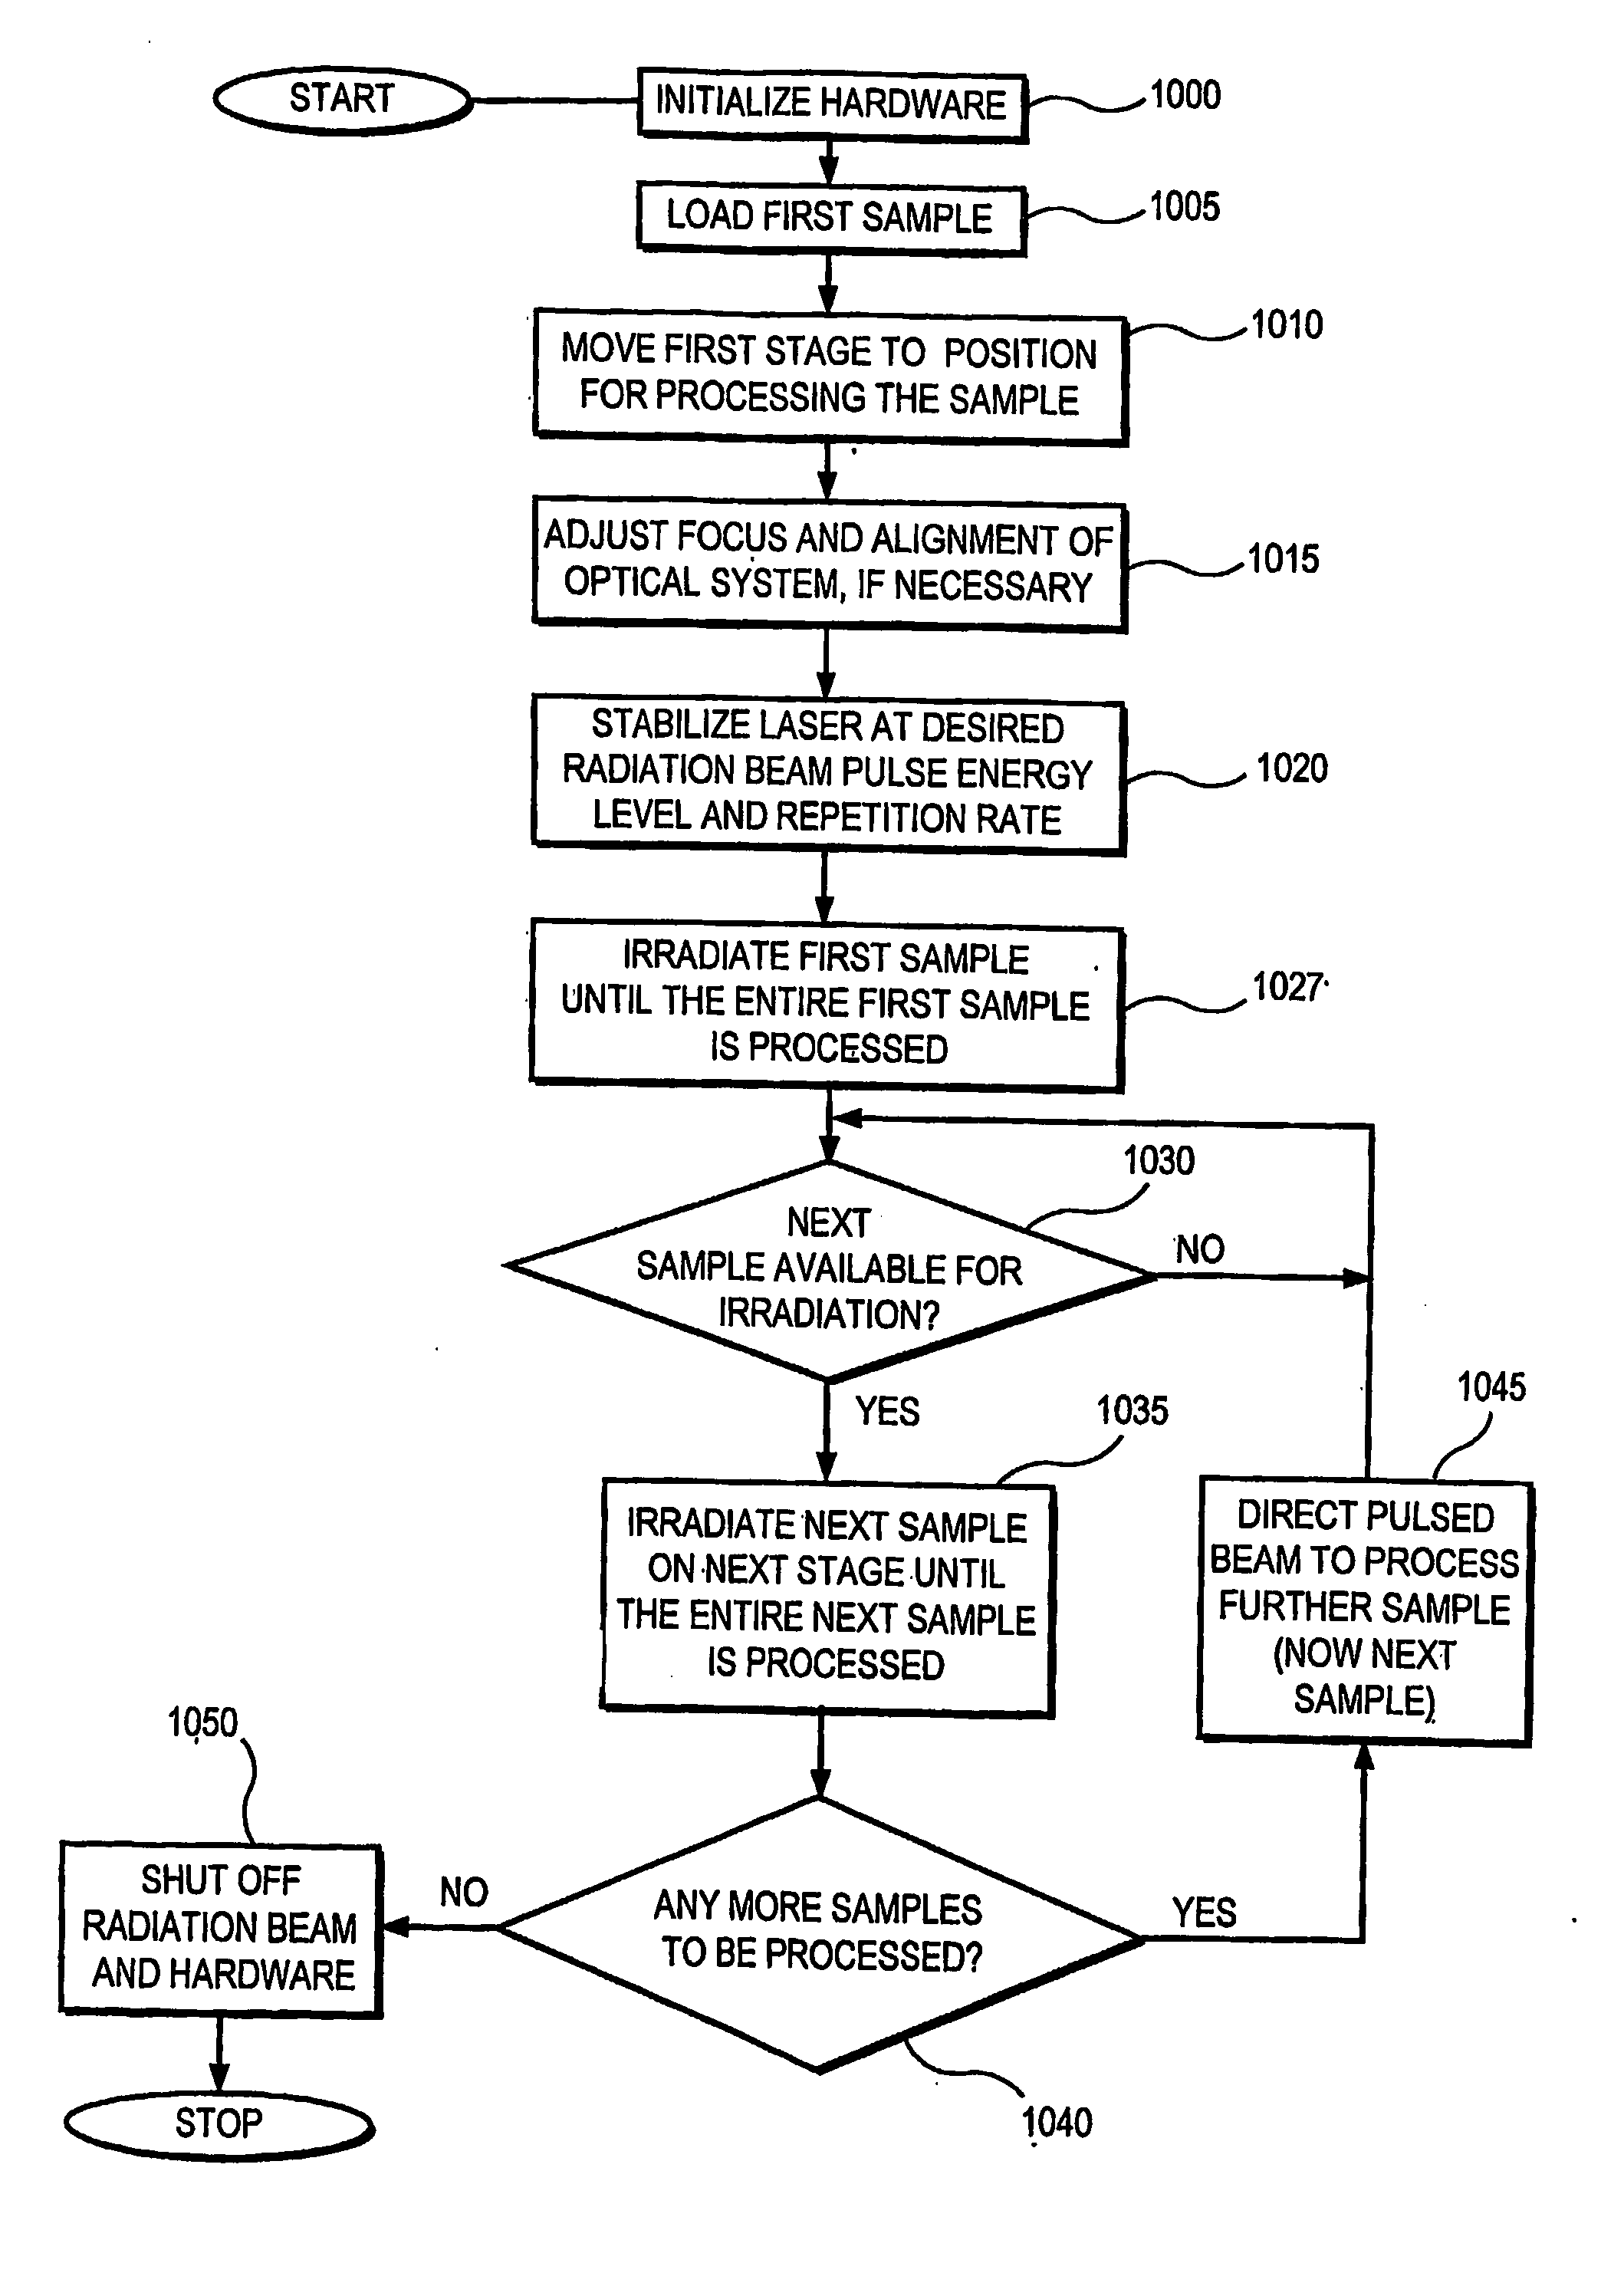 System and process for processing a plurality of semiconductor thin films which are crystallized using sequential lateral solidification techniques